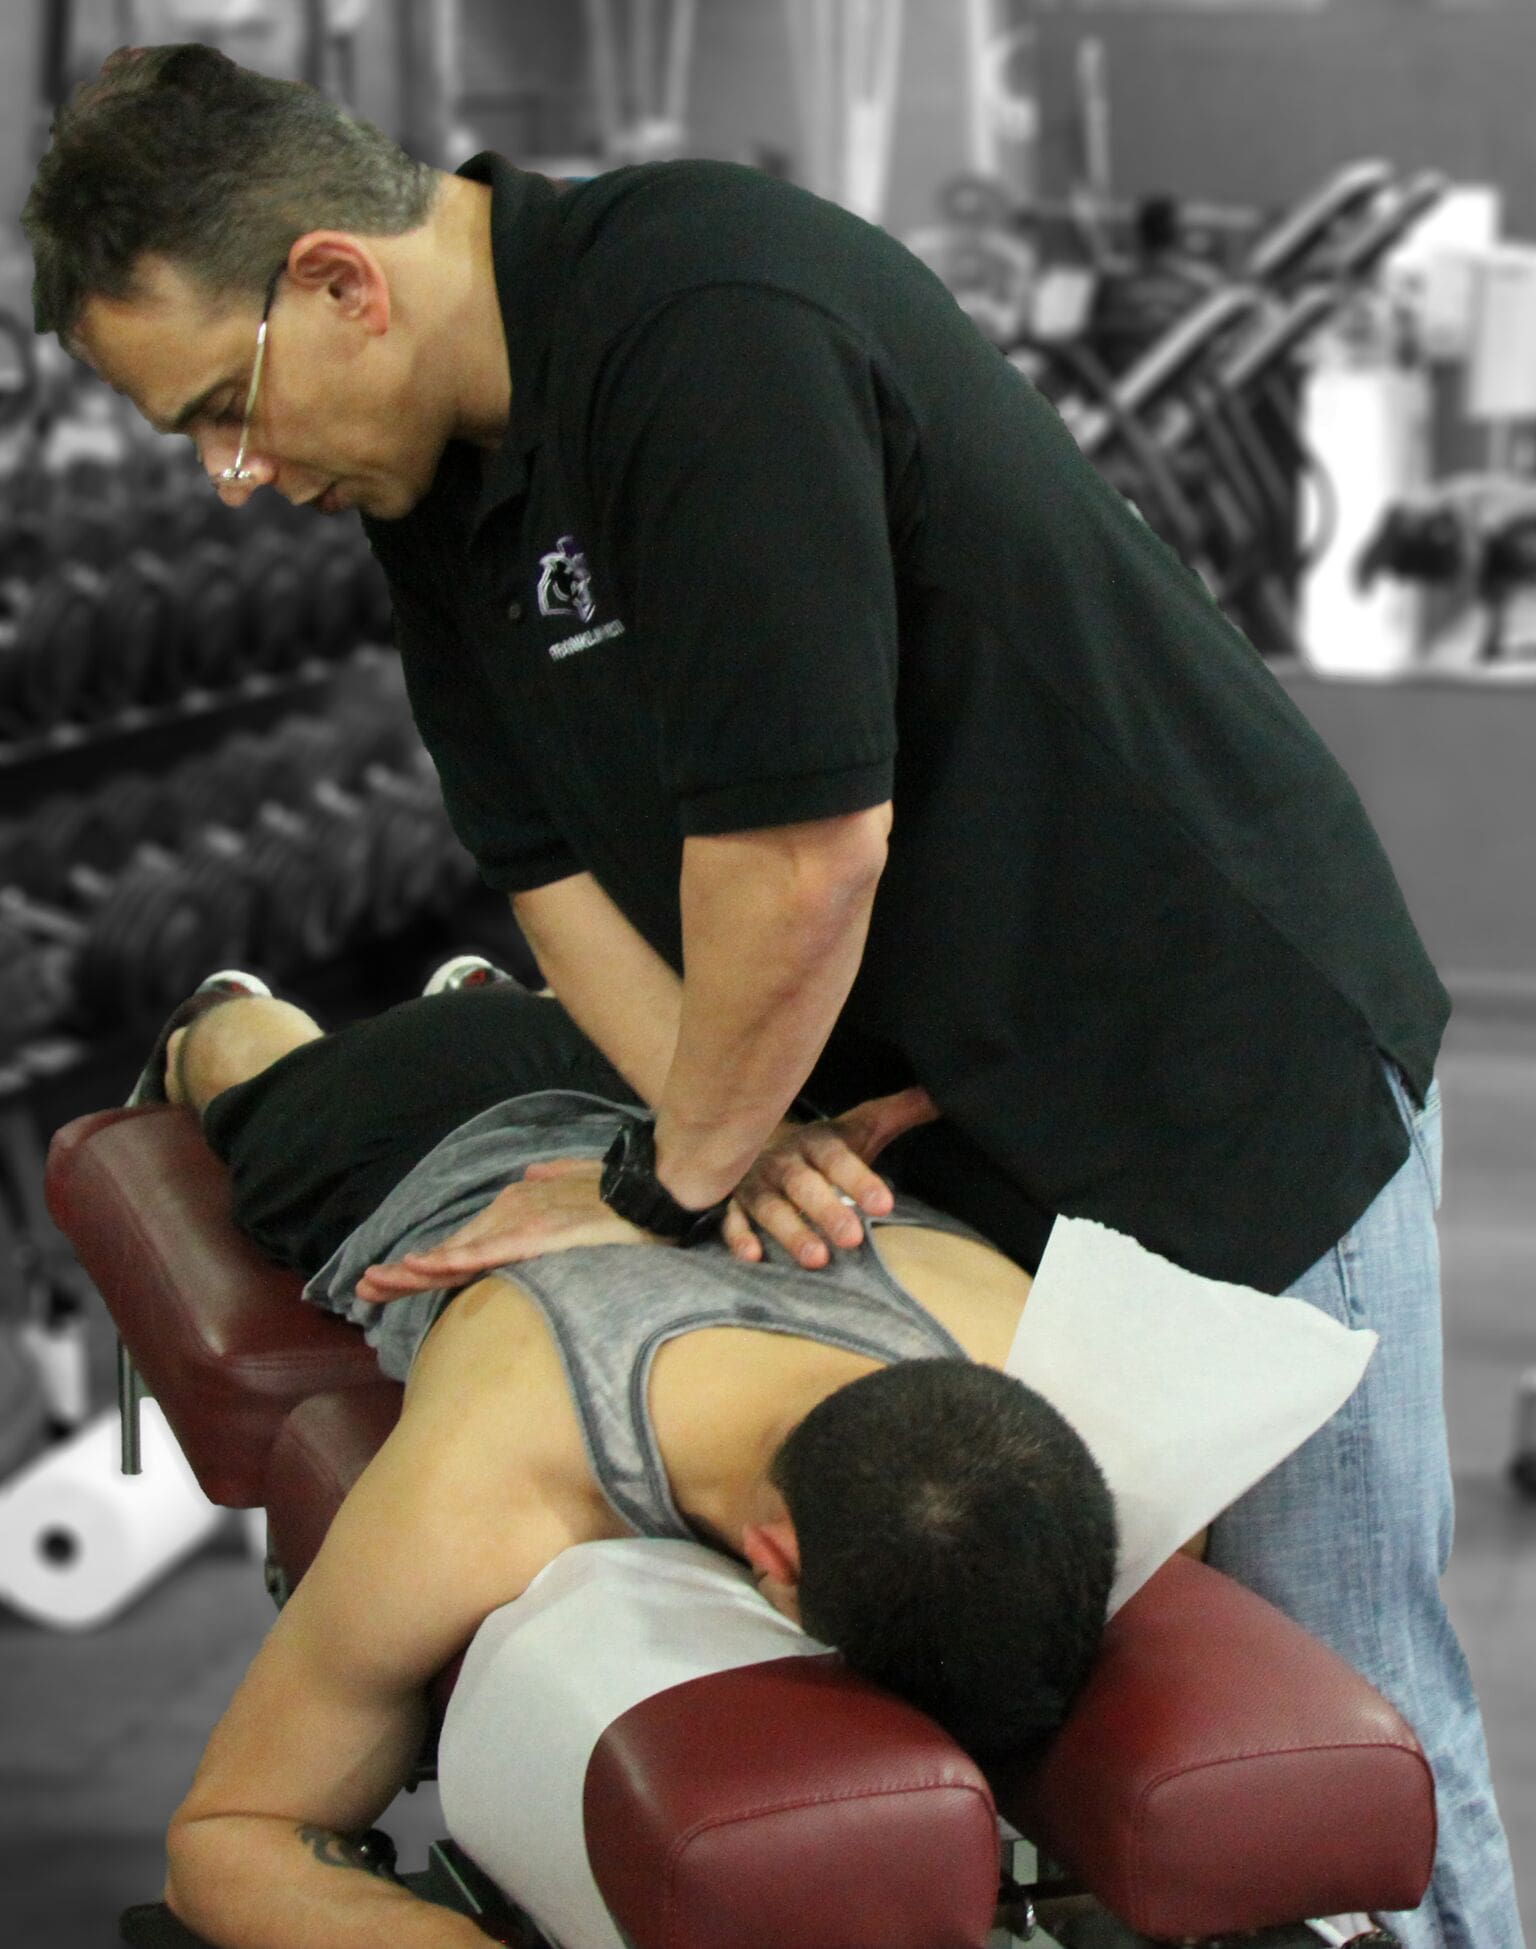 Dr Jimenez works on back treatment at Push crossfit competition | El Paso, TX Chiropractor